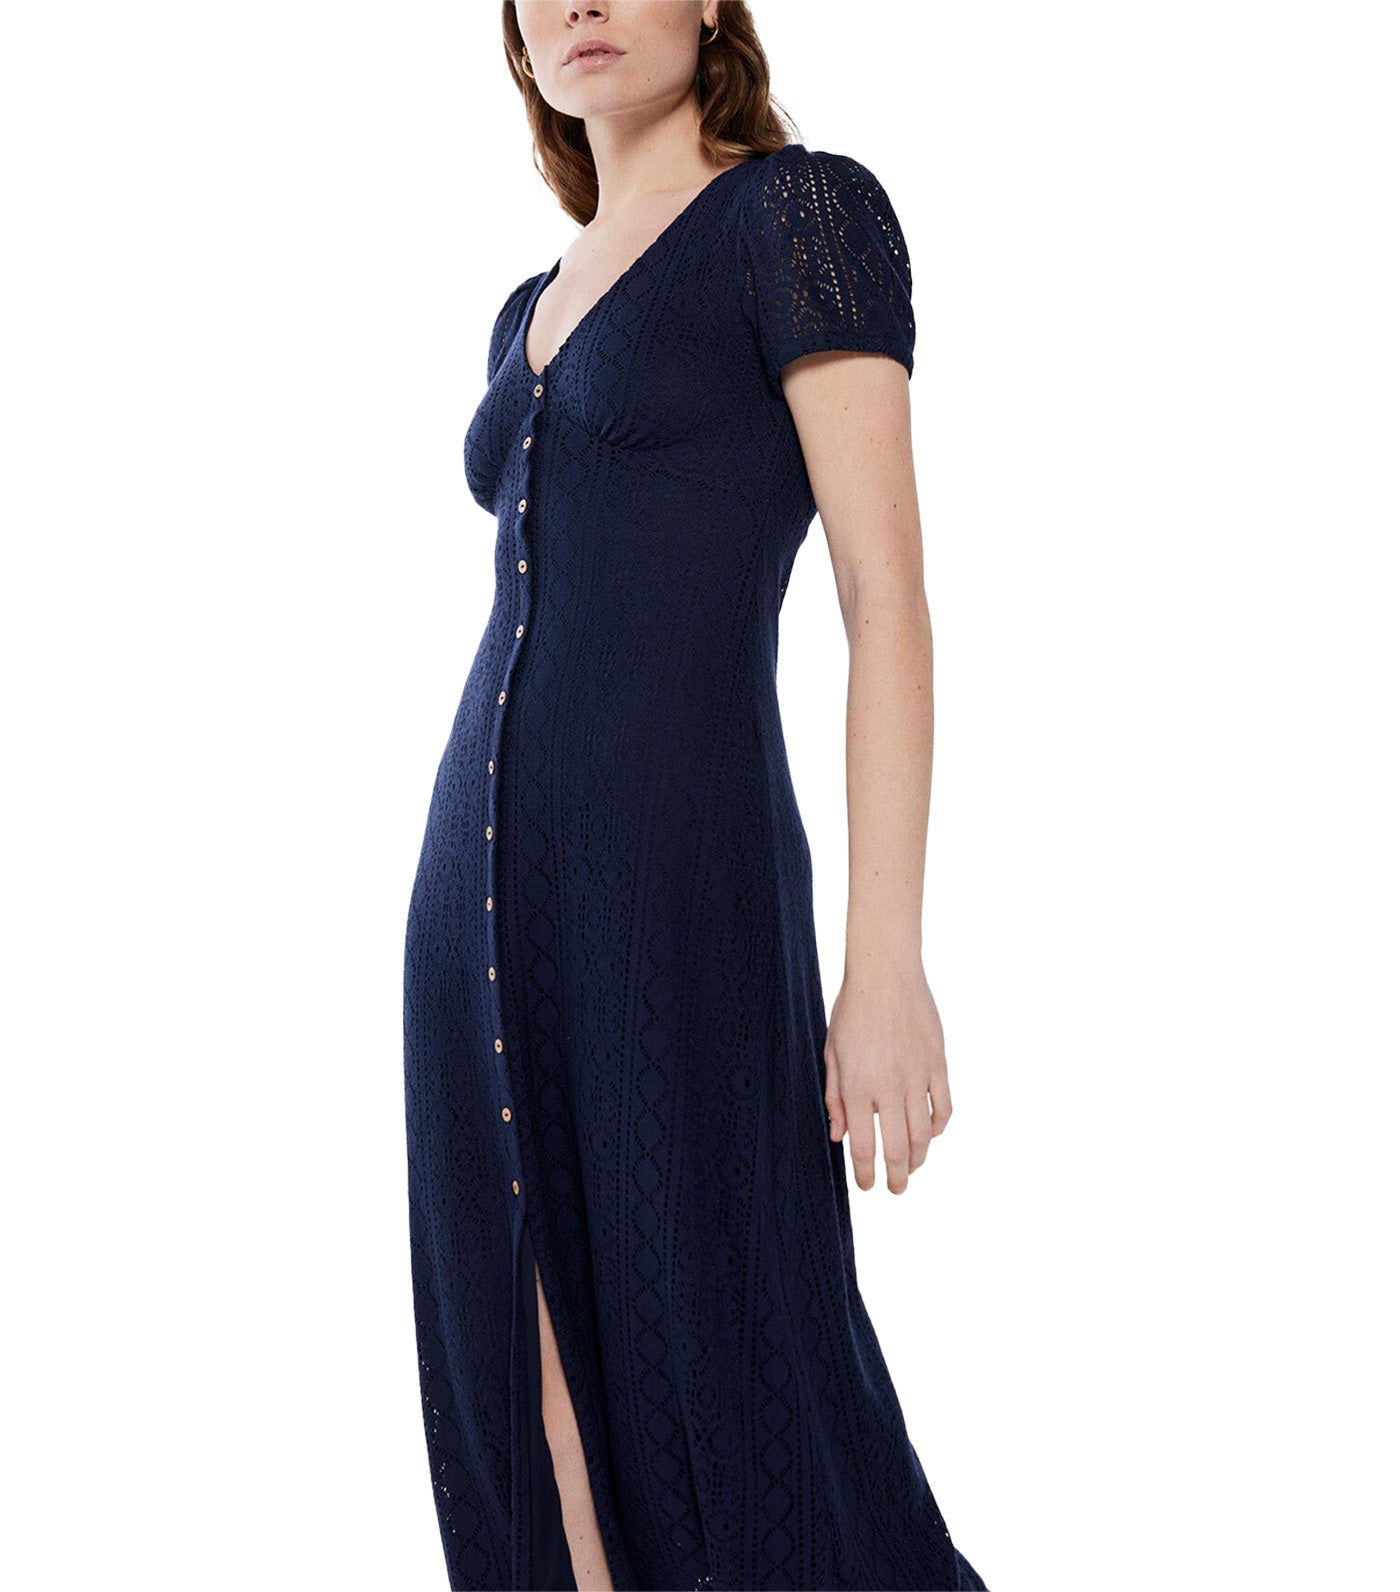 Crochet Midi Dress with Buttons Navy